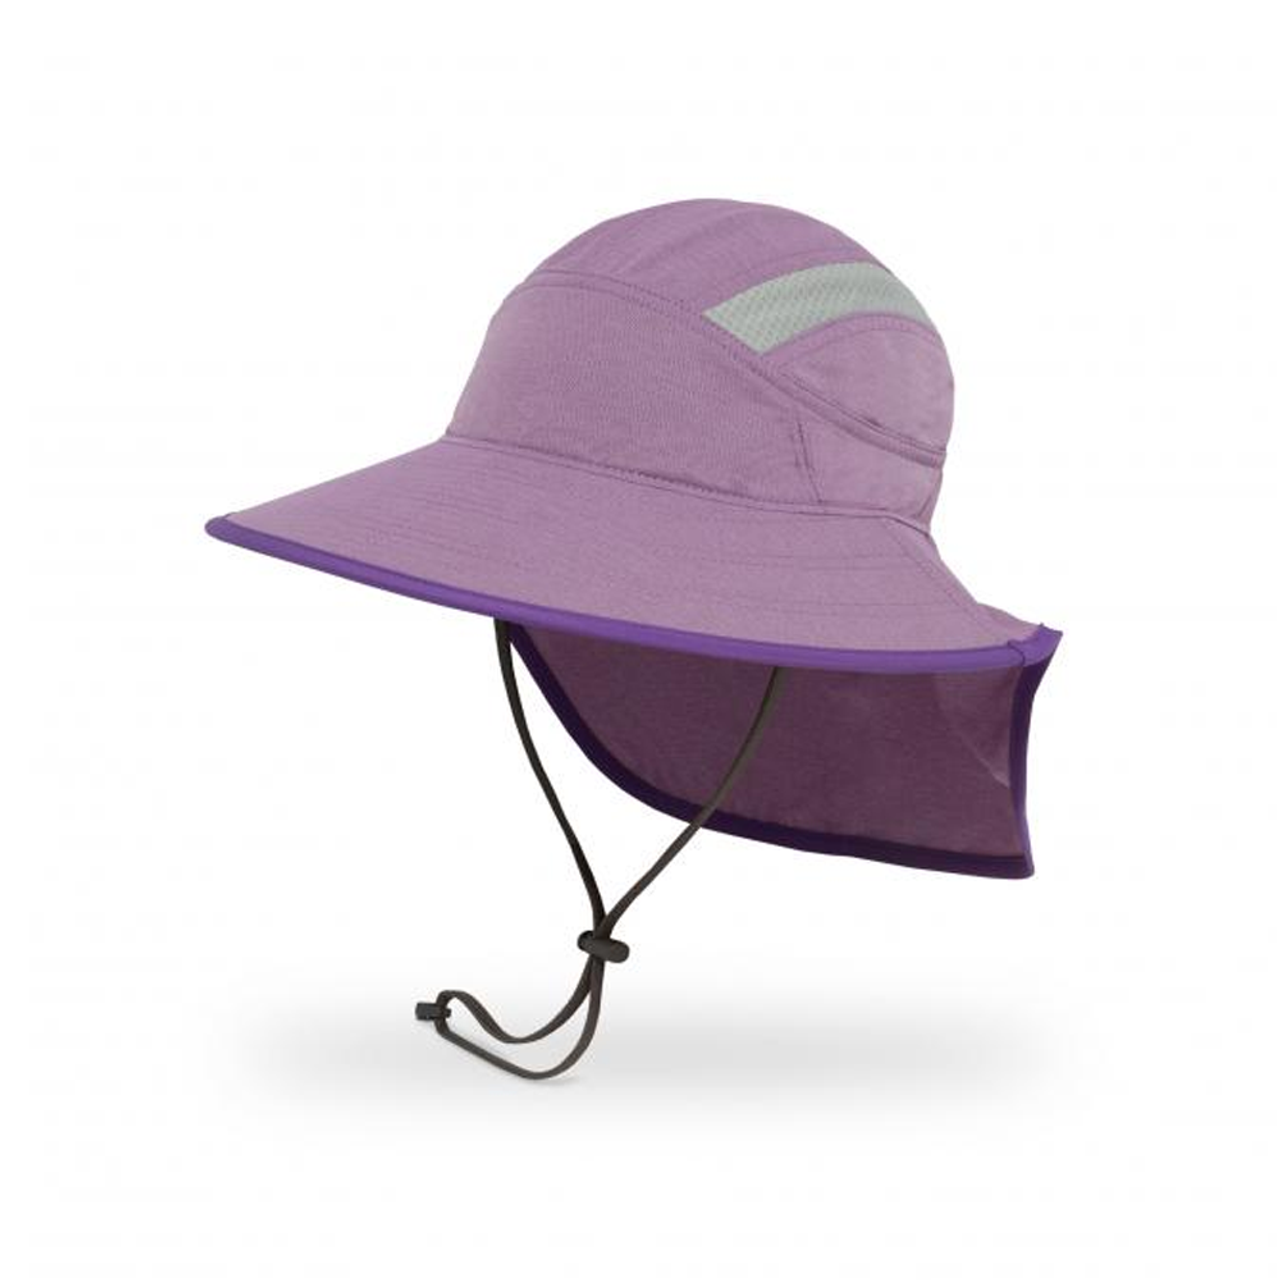 https://cdn11.bigcommerce.com/s-p6xvlcn3x2/images/stencil/1280x1280/products/28231/297564/Sunday-Afternoons-Kids-Ultra-Adventure-Hat-_268812__86110.1670874621.png?c=1